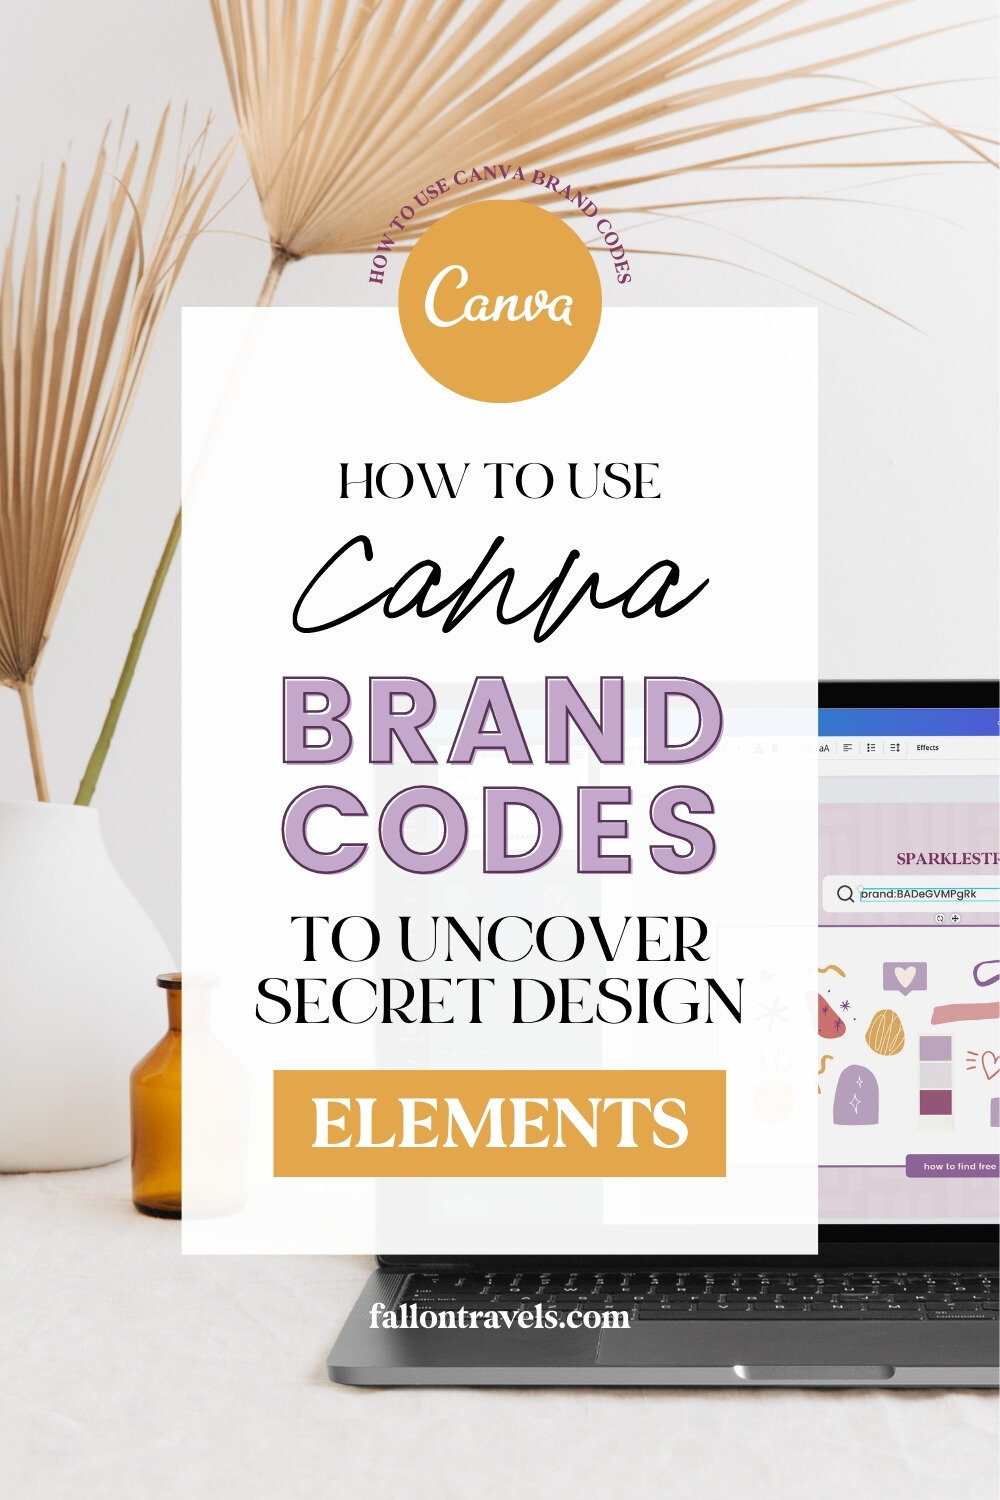 How to use Canva Brand Codes to Uncover Secret Design Elements | Fallon Travels